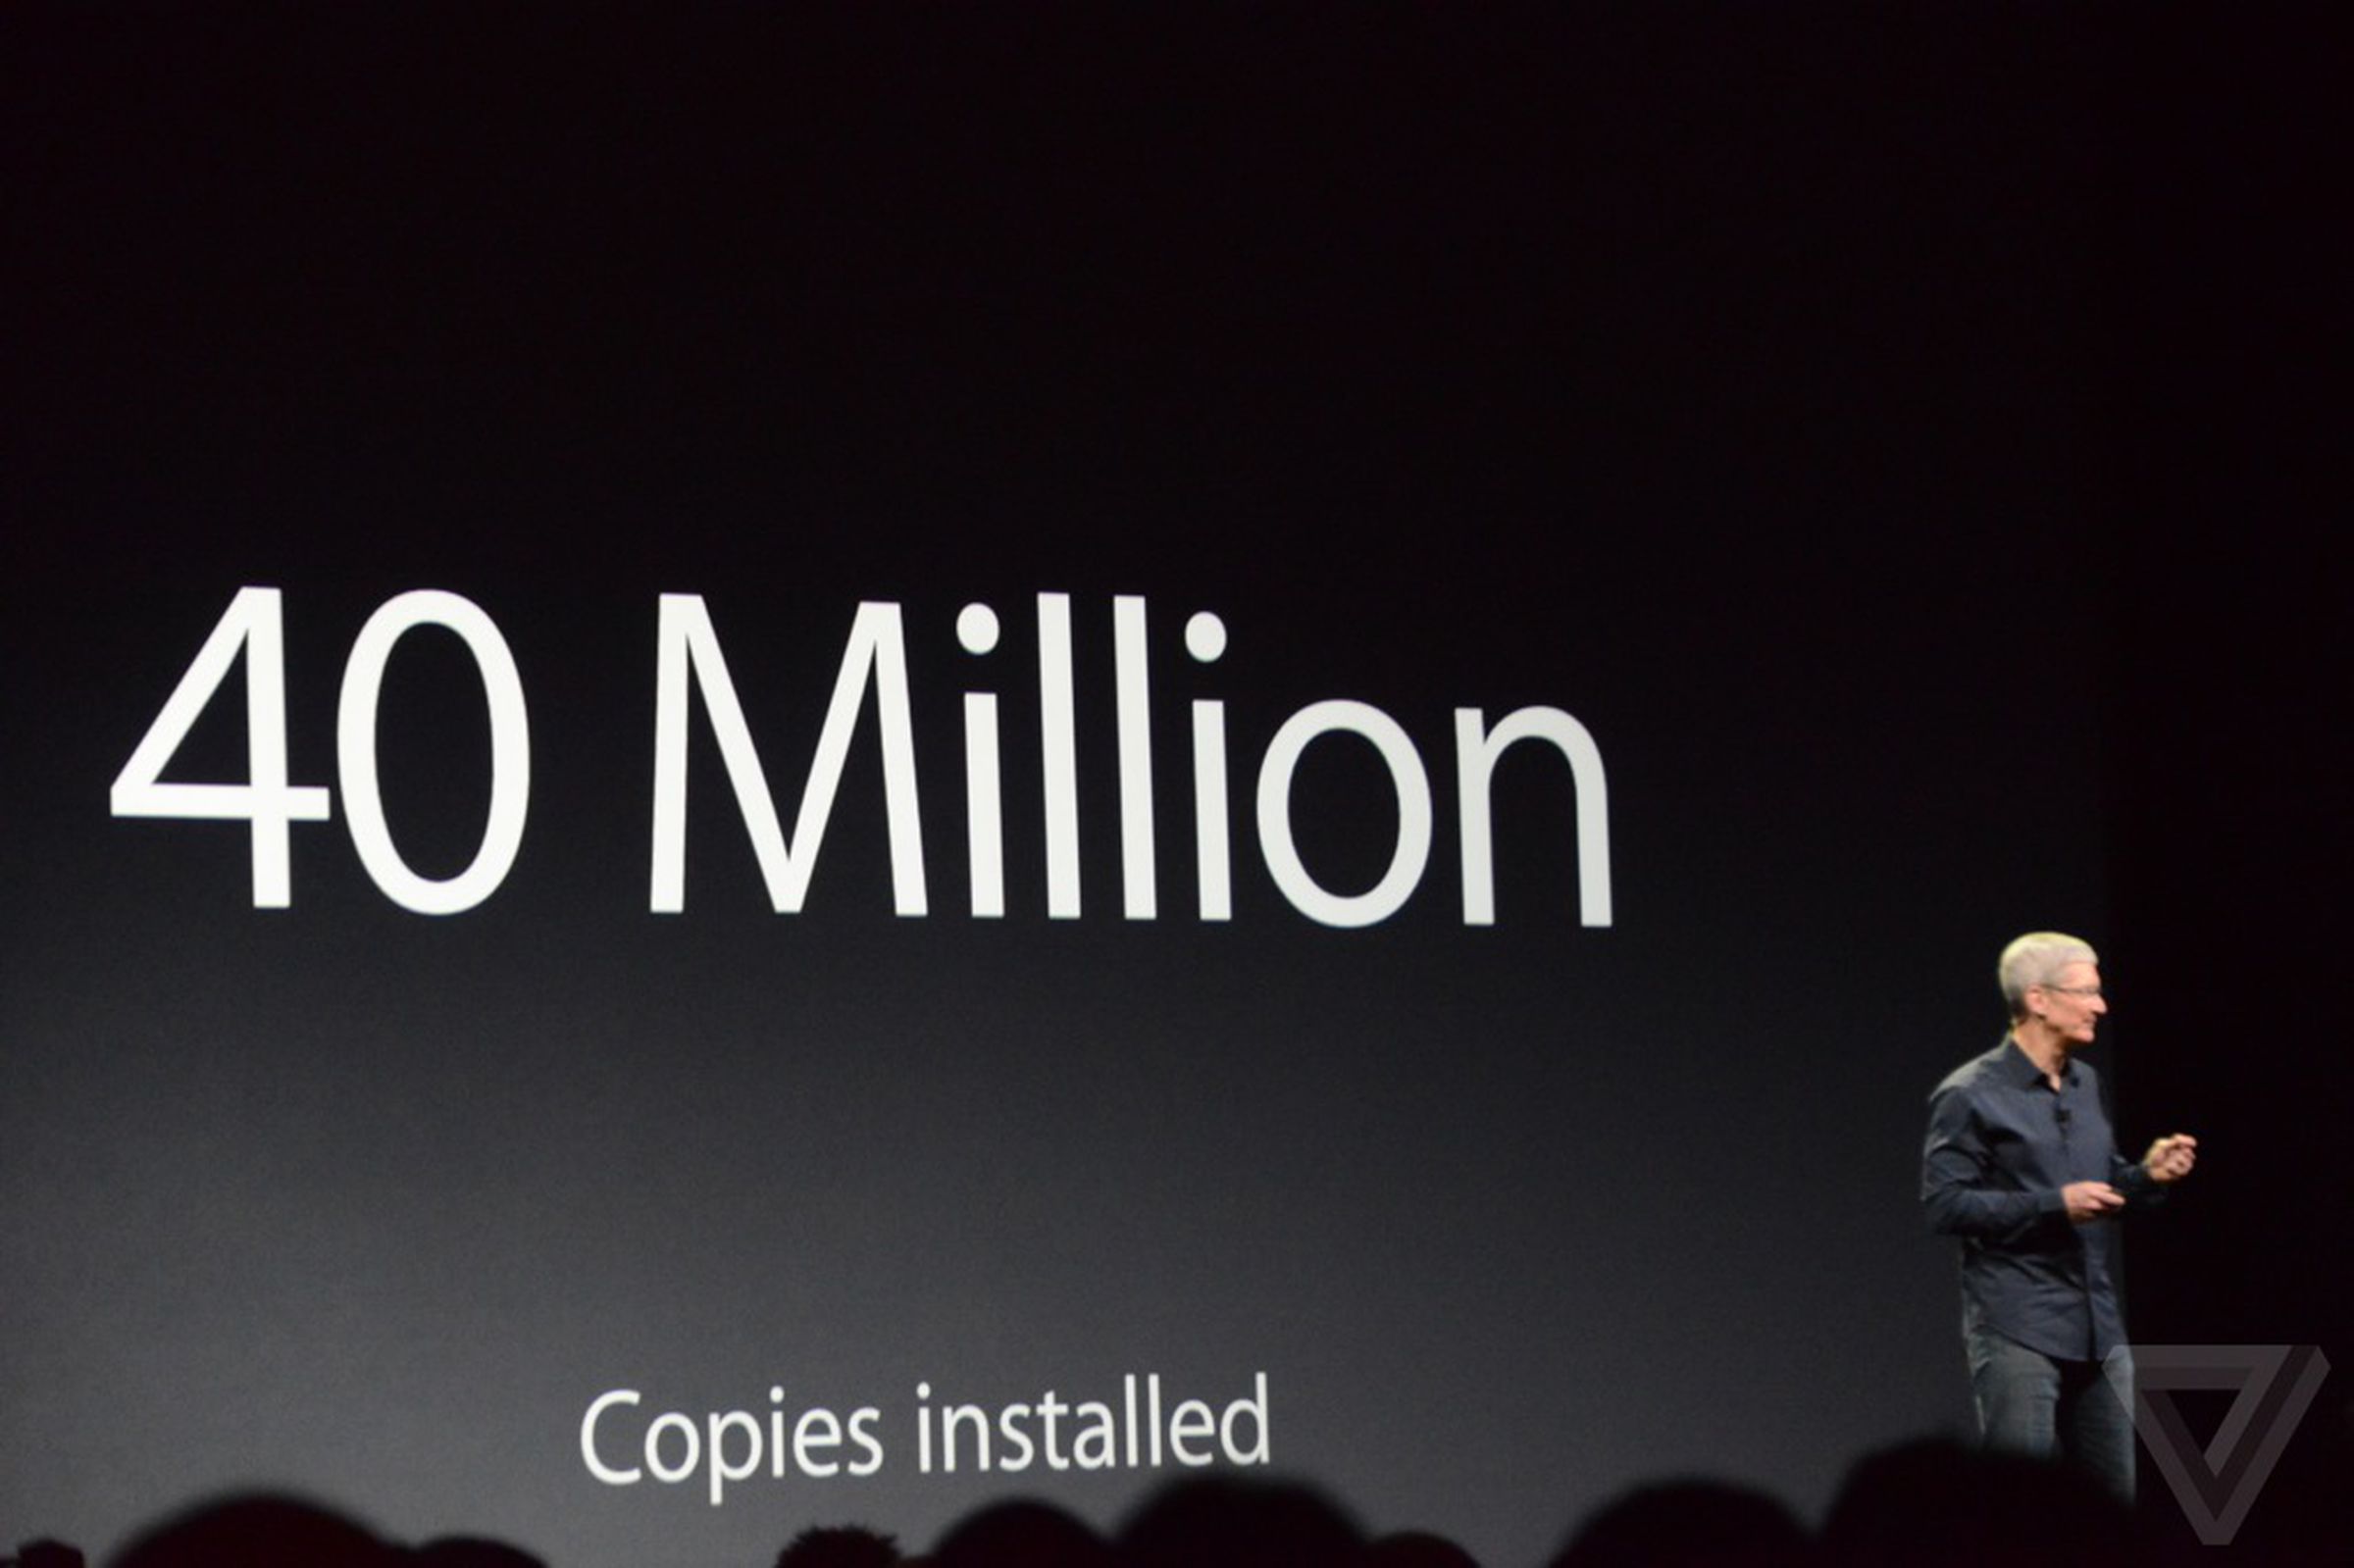 Apple's WWDC 2014 by the numbers